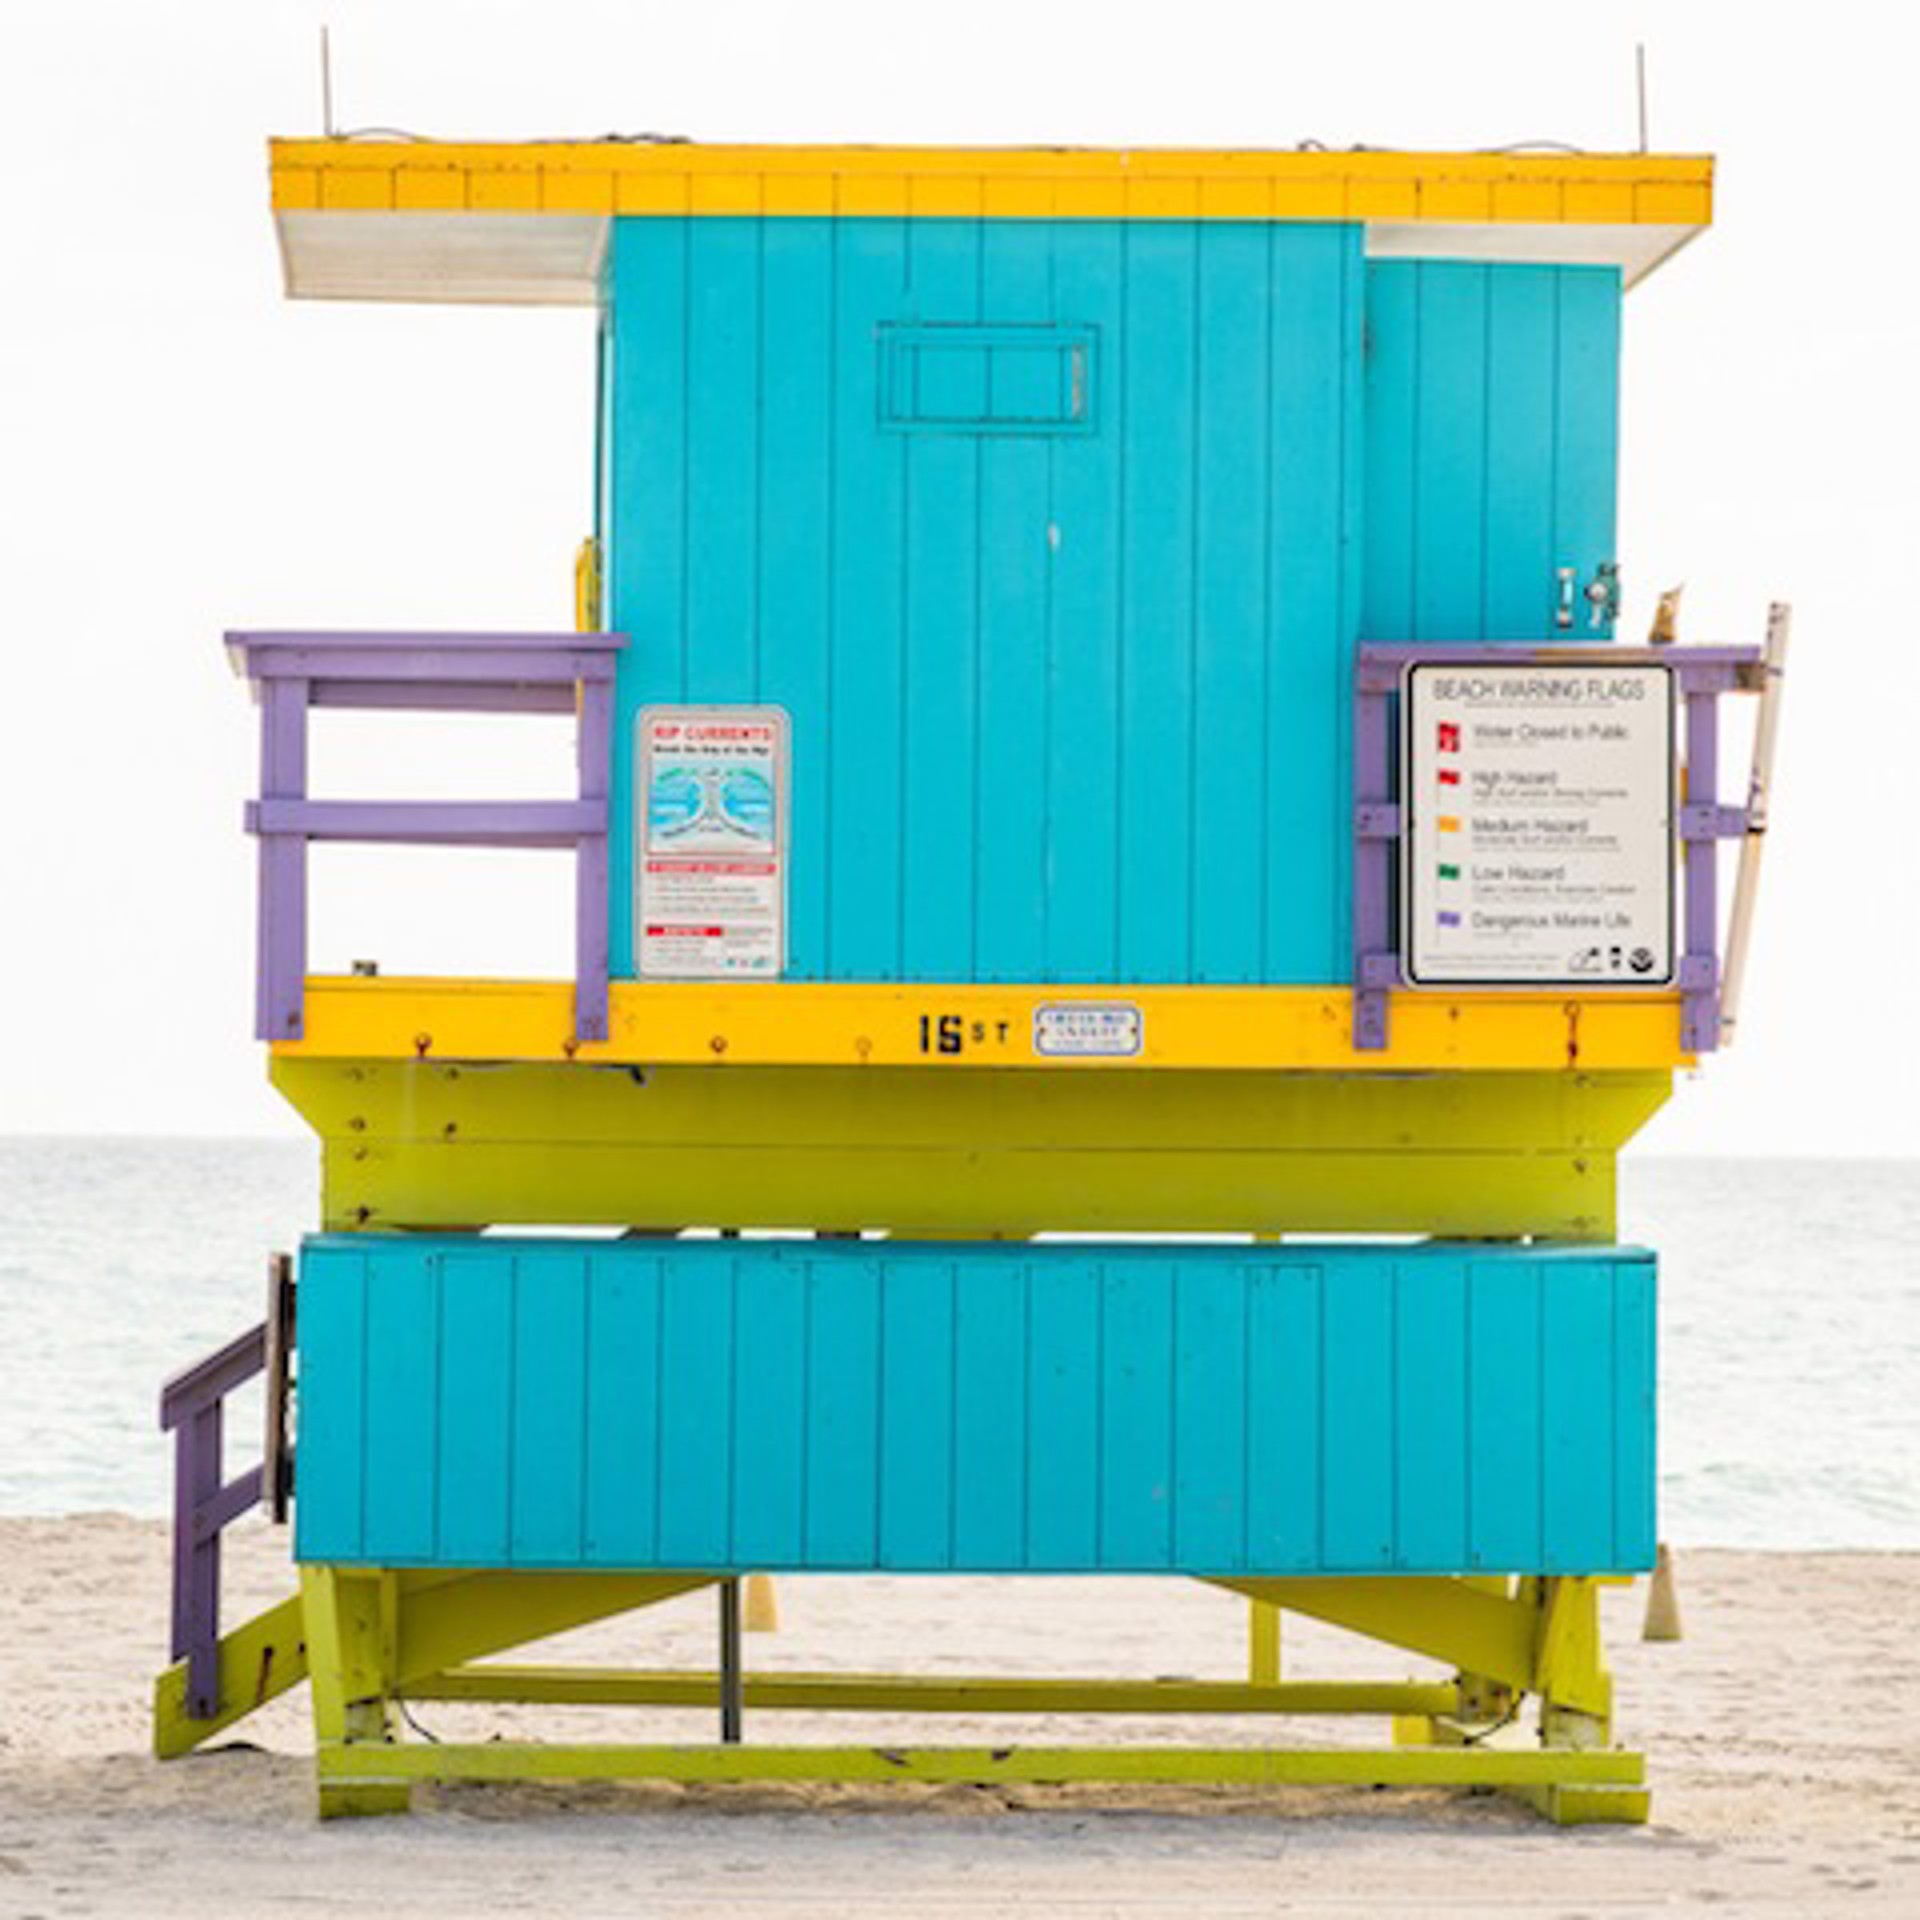 16th Street Lifeguard Stand, Rear View by Peter Mendelson